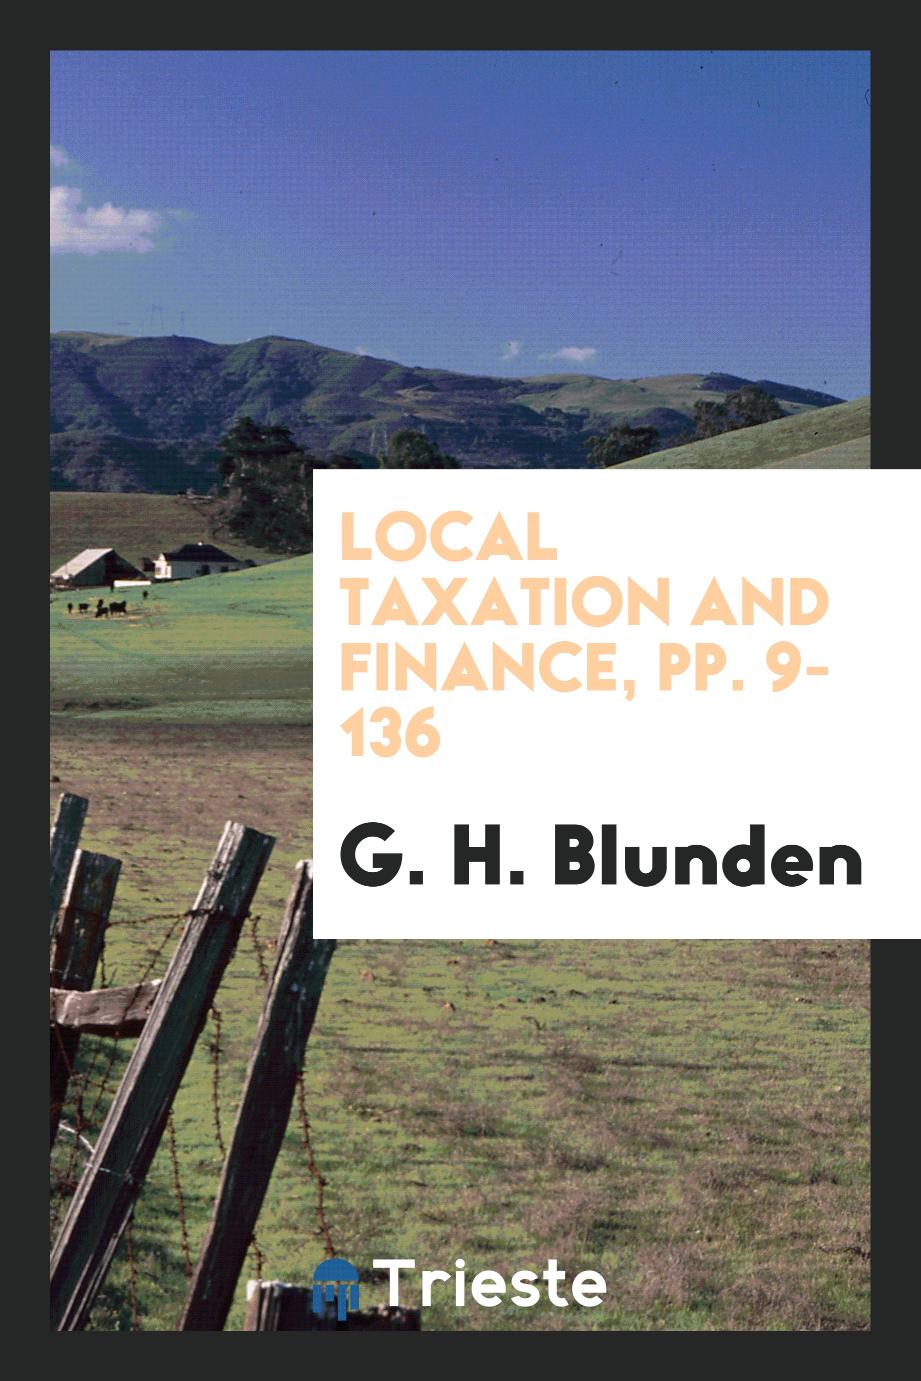 Local Taxation and Finance, pp. 9-136